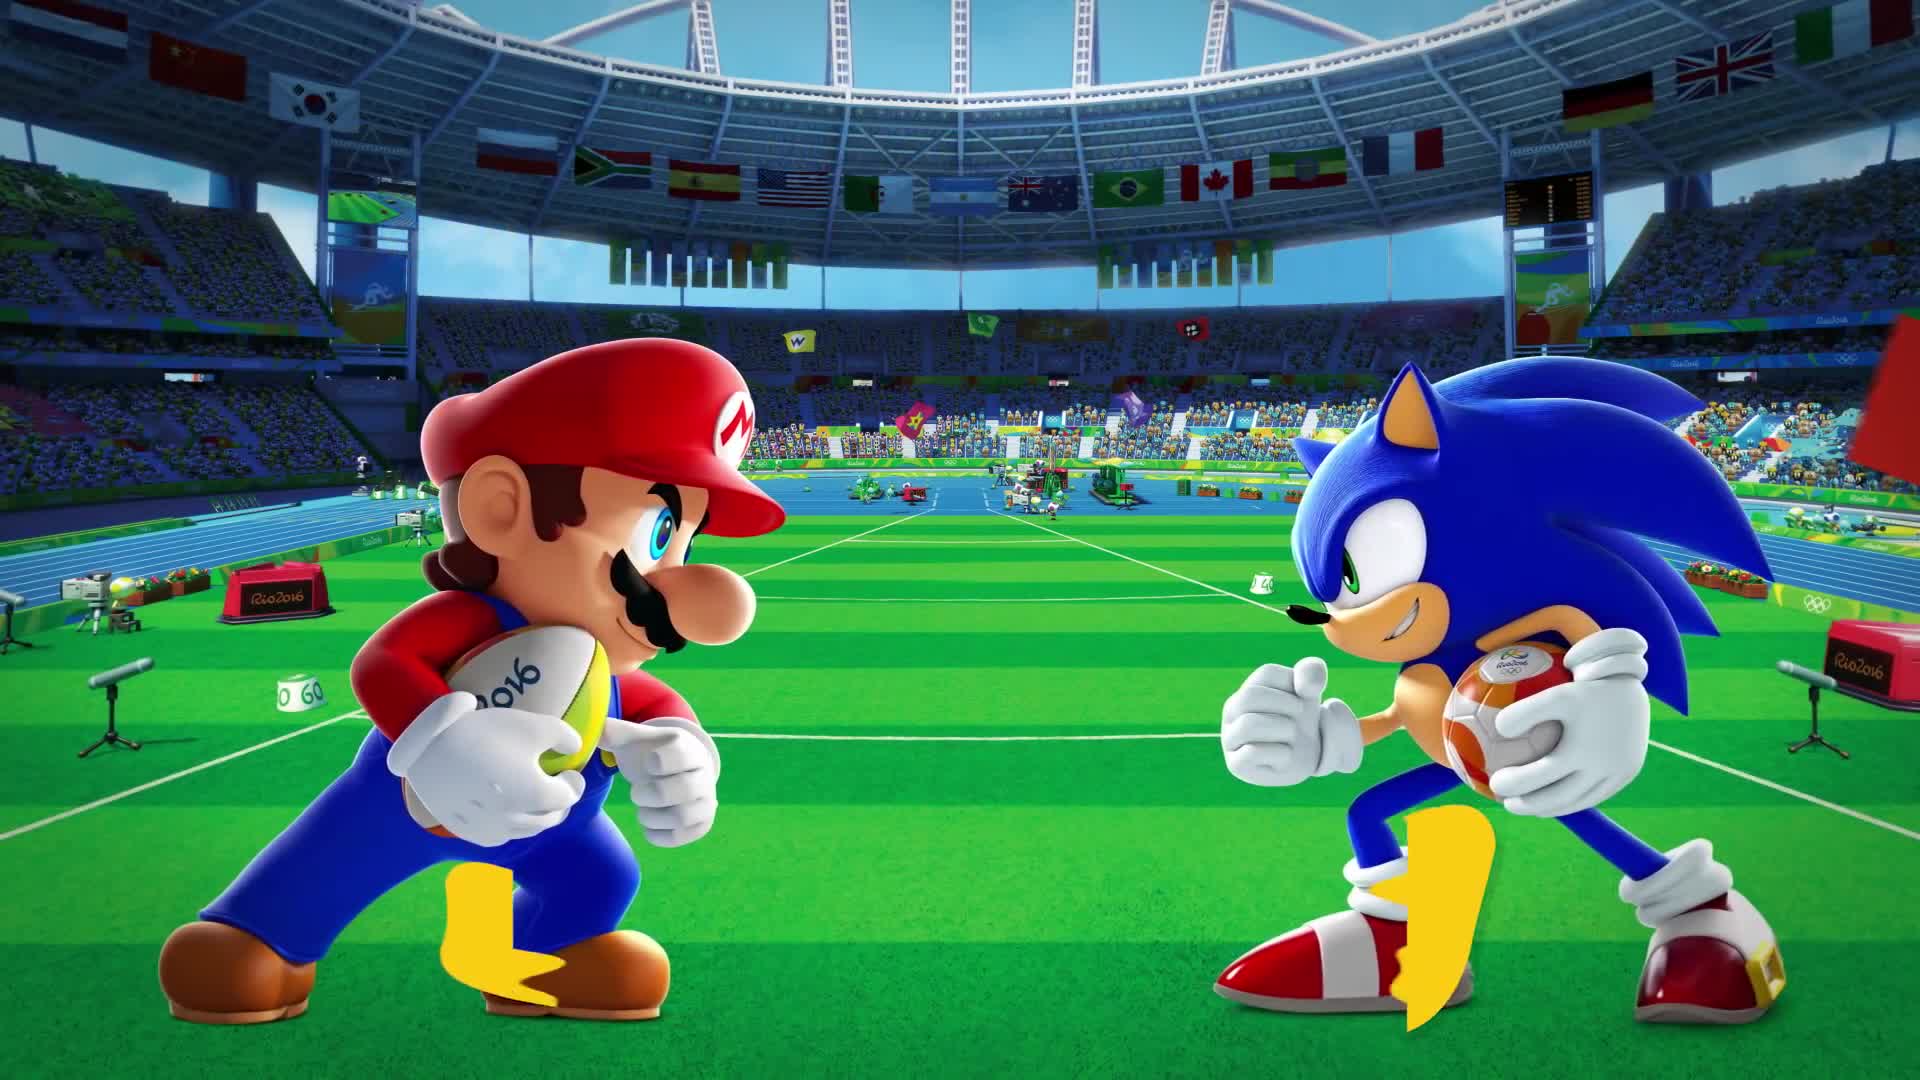 Mario & Sonic at the Rio 2016 Olympic Games - Heroes Showdown Trailer